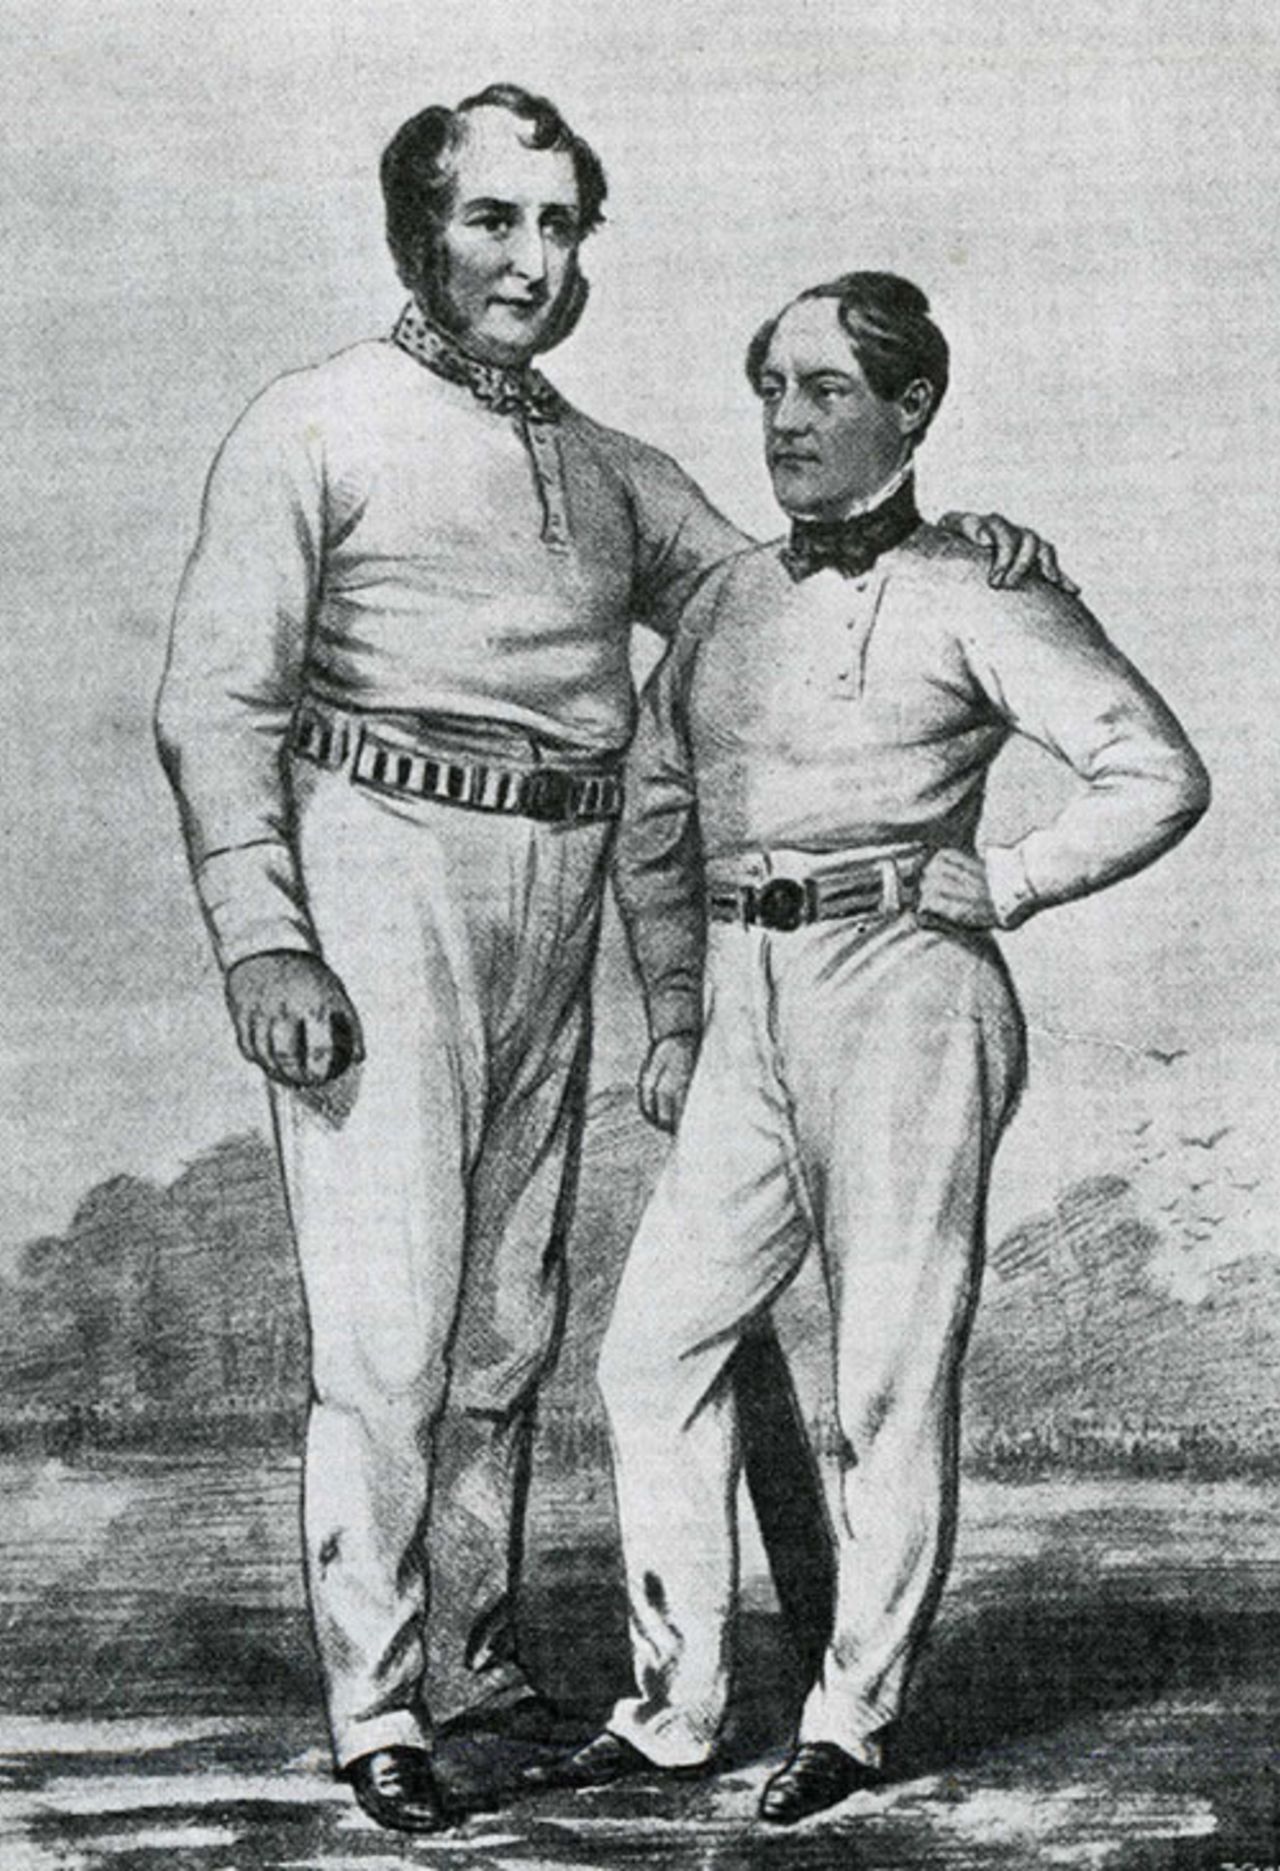 Alfred Mynn and Nicholas Felix, who contested the last of the great single-wicket matches in 1846. Mynn won both games, at Lord's and then Bromley